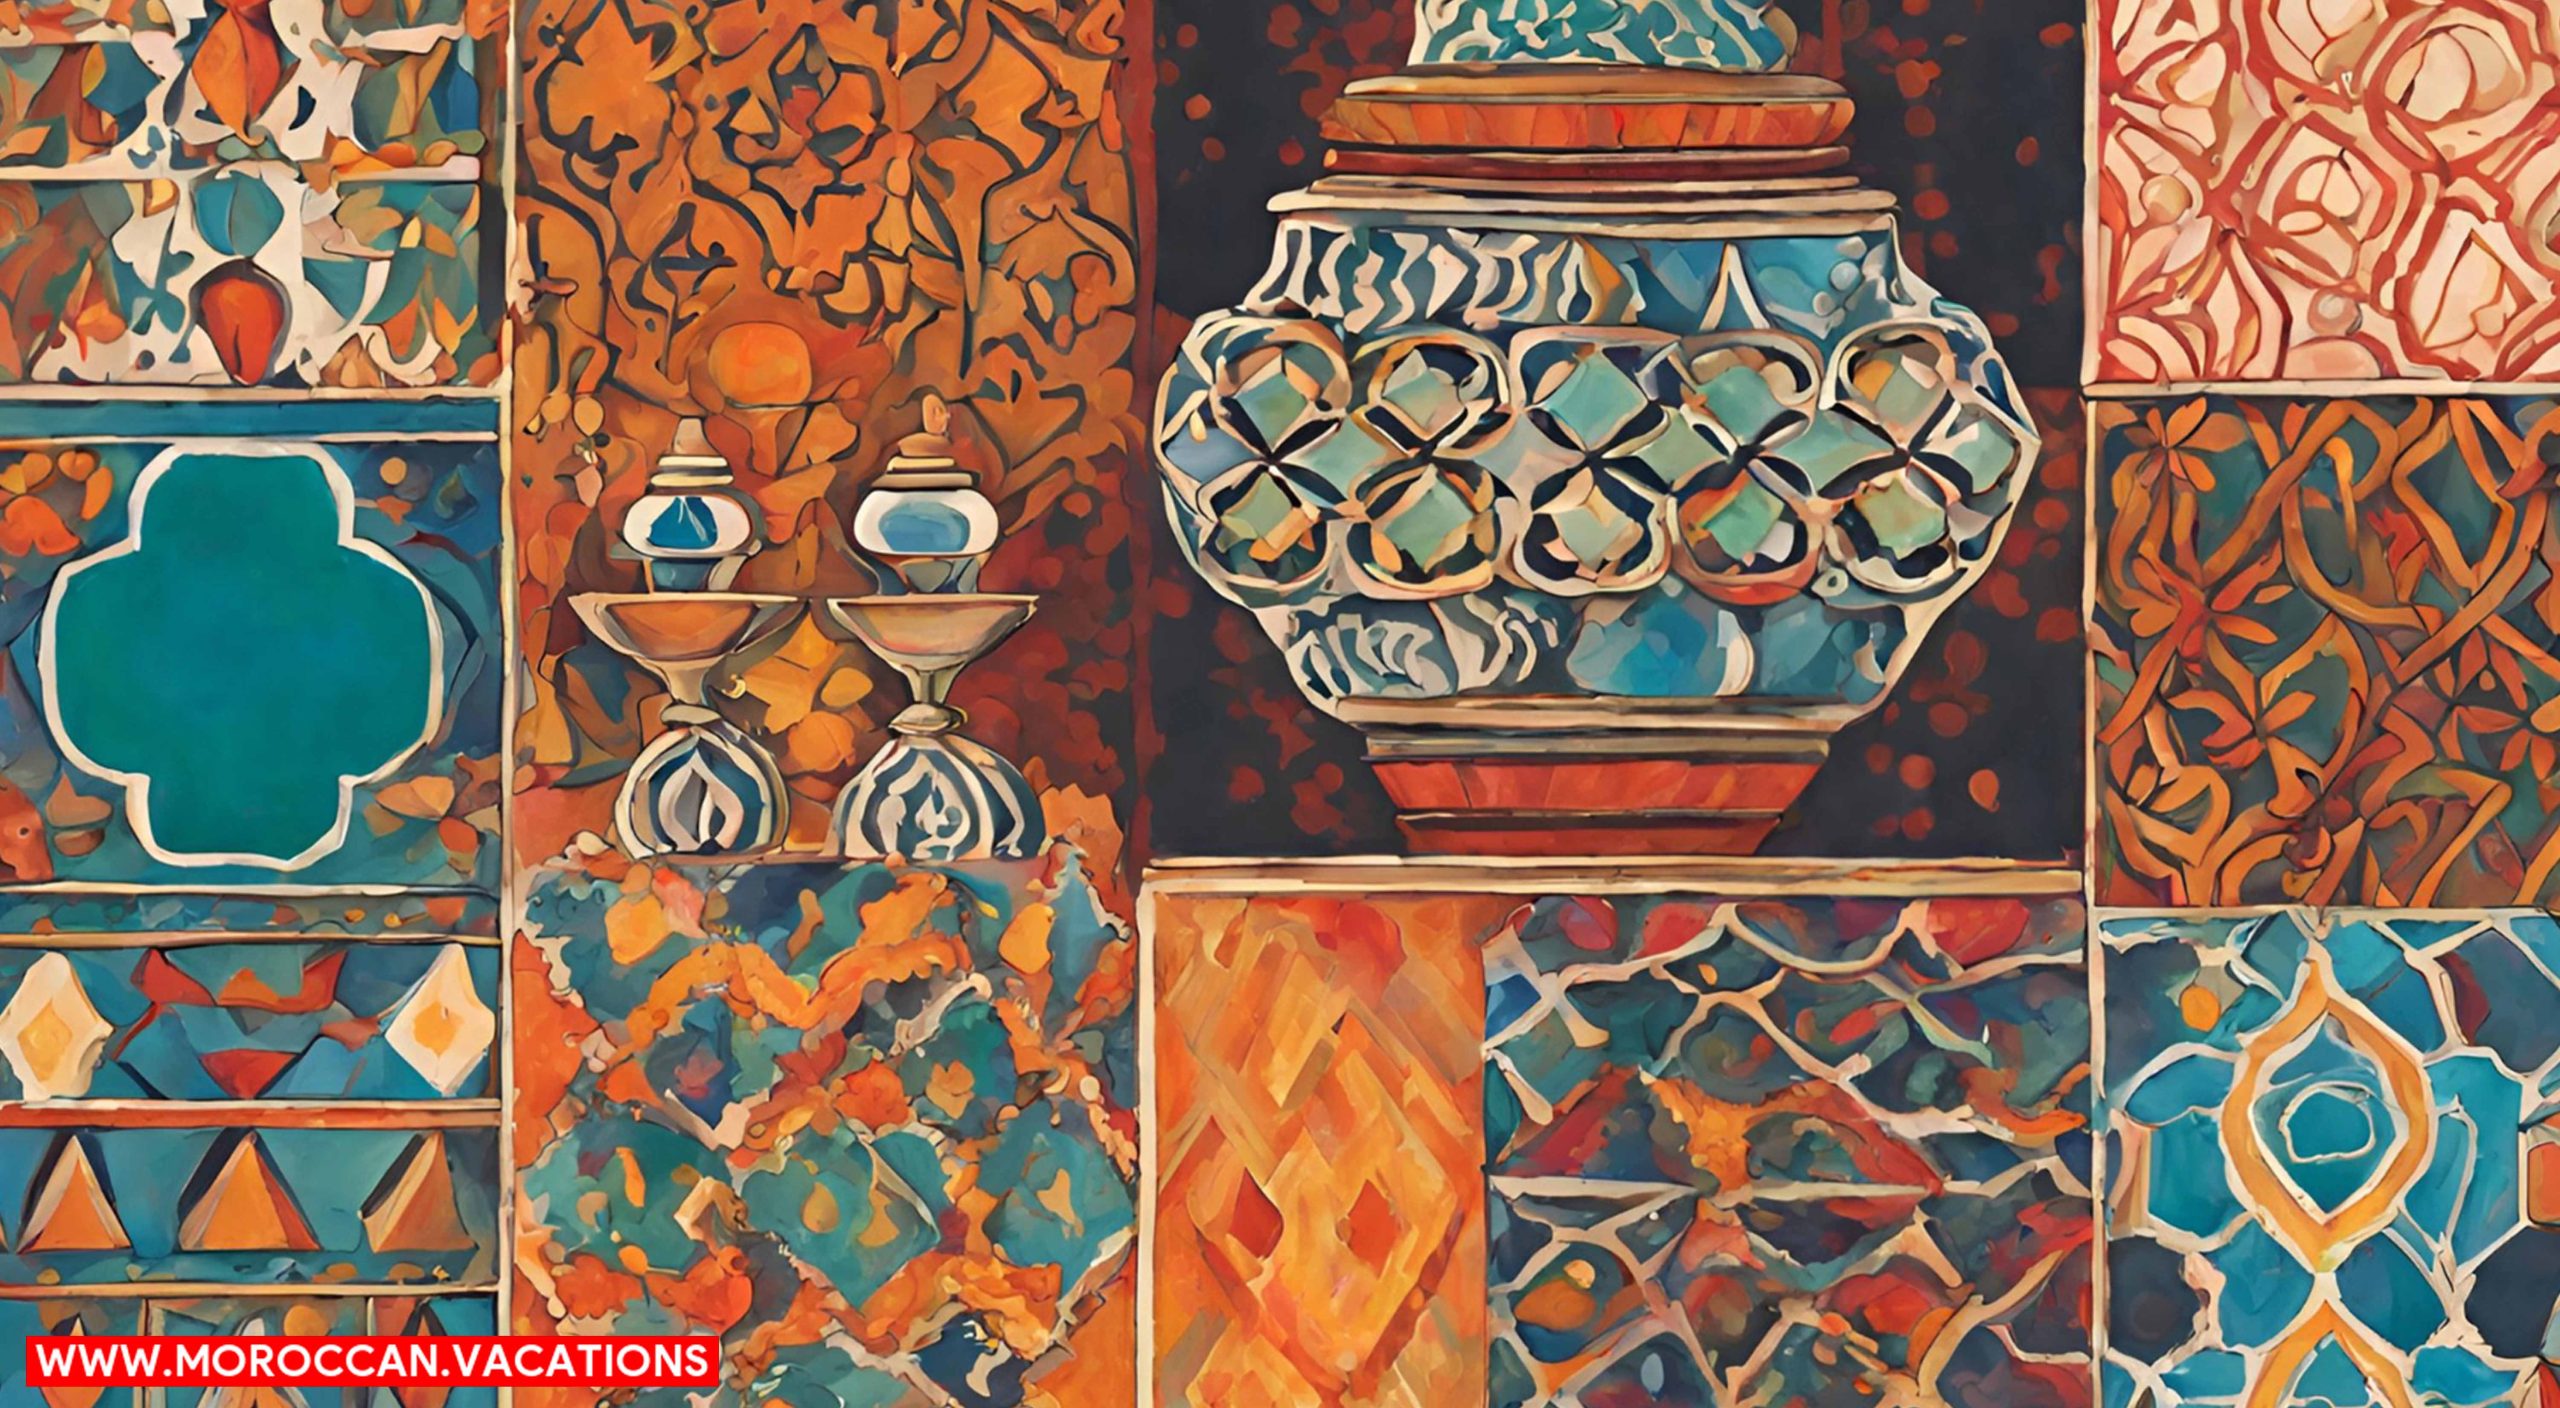 The vibrant fusion of Moroccan art influences from around the world.